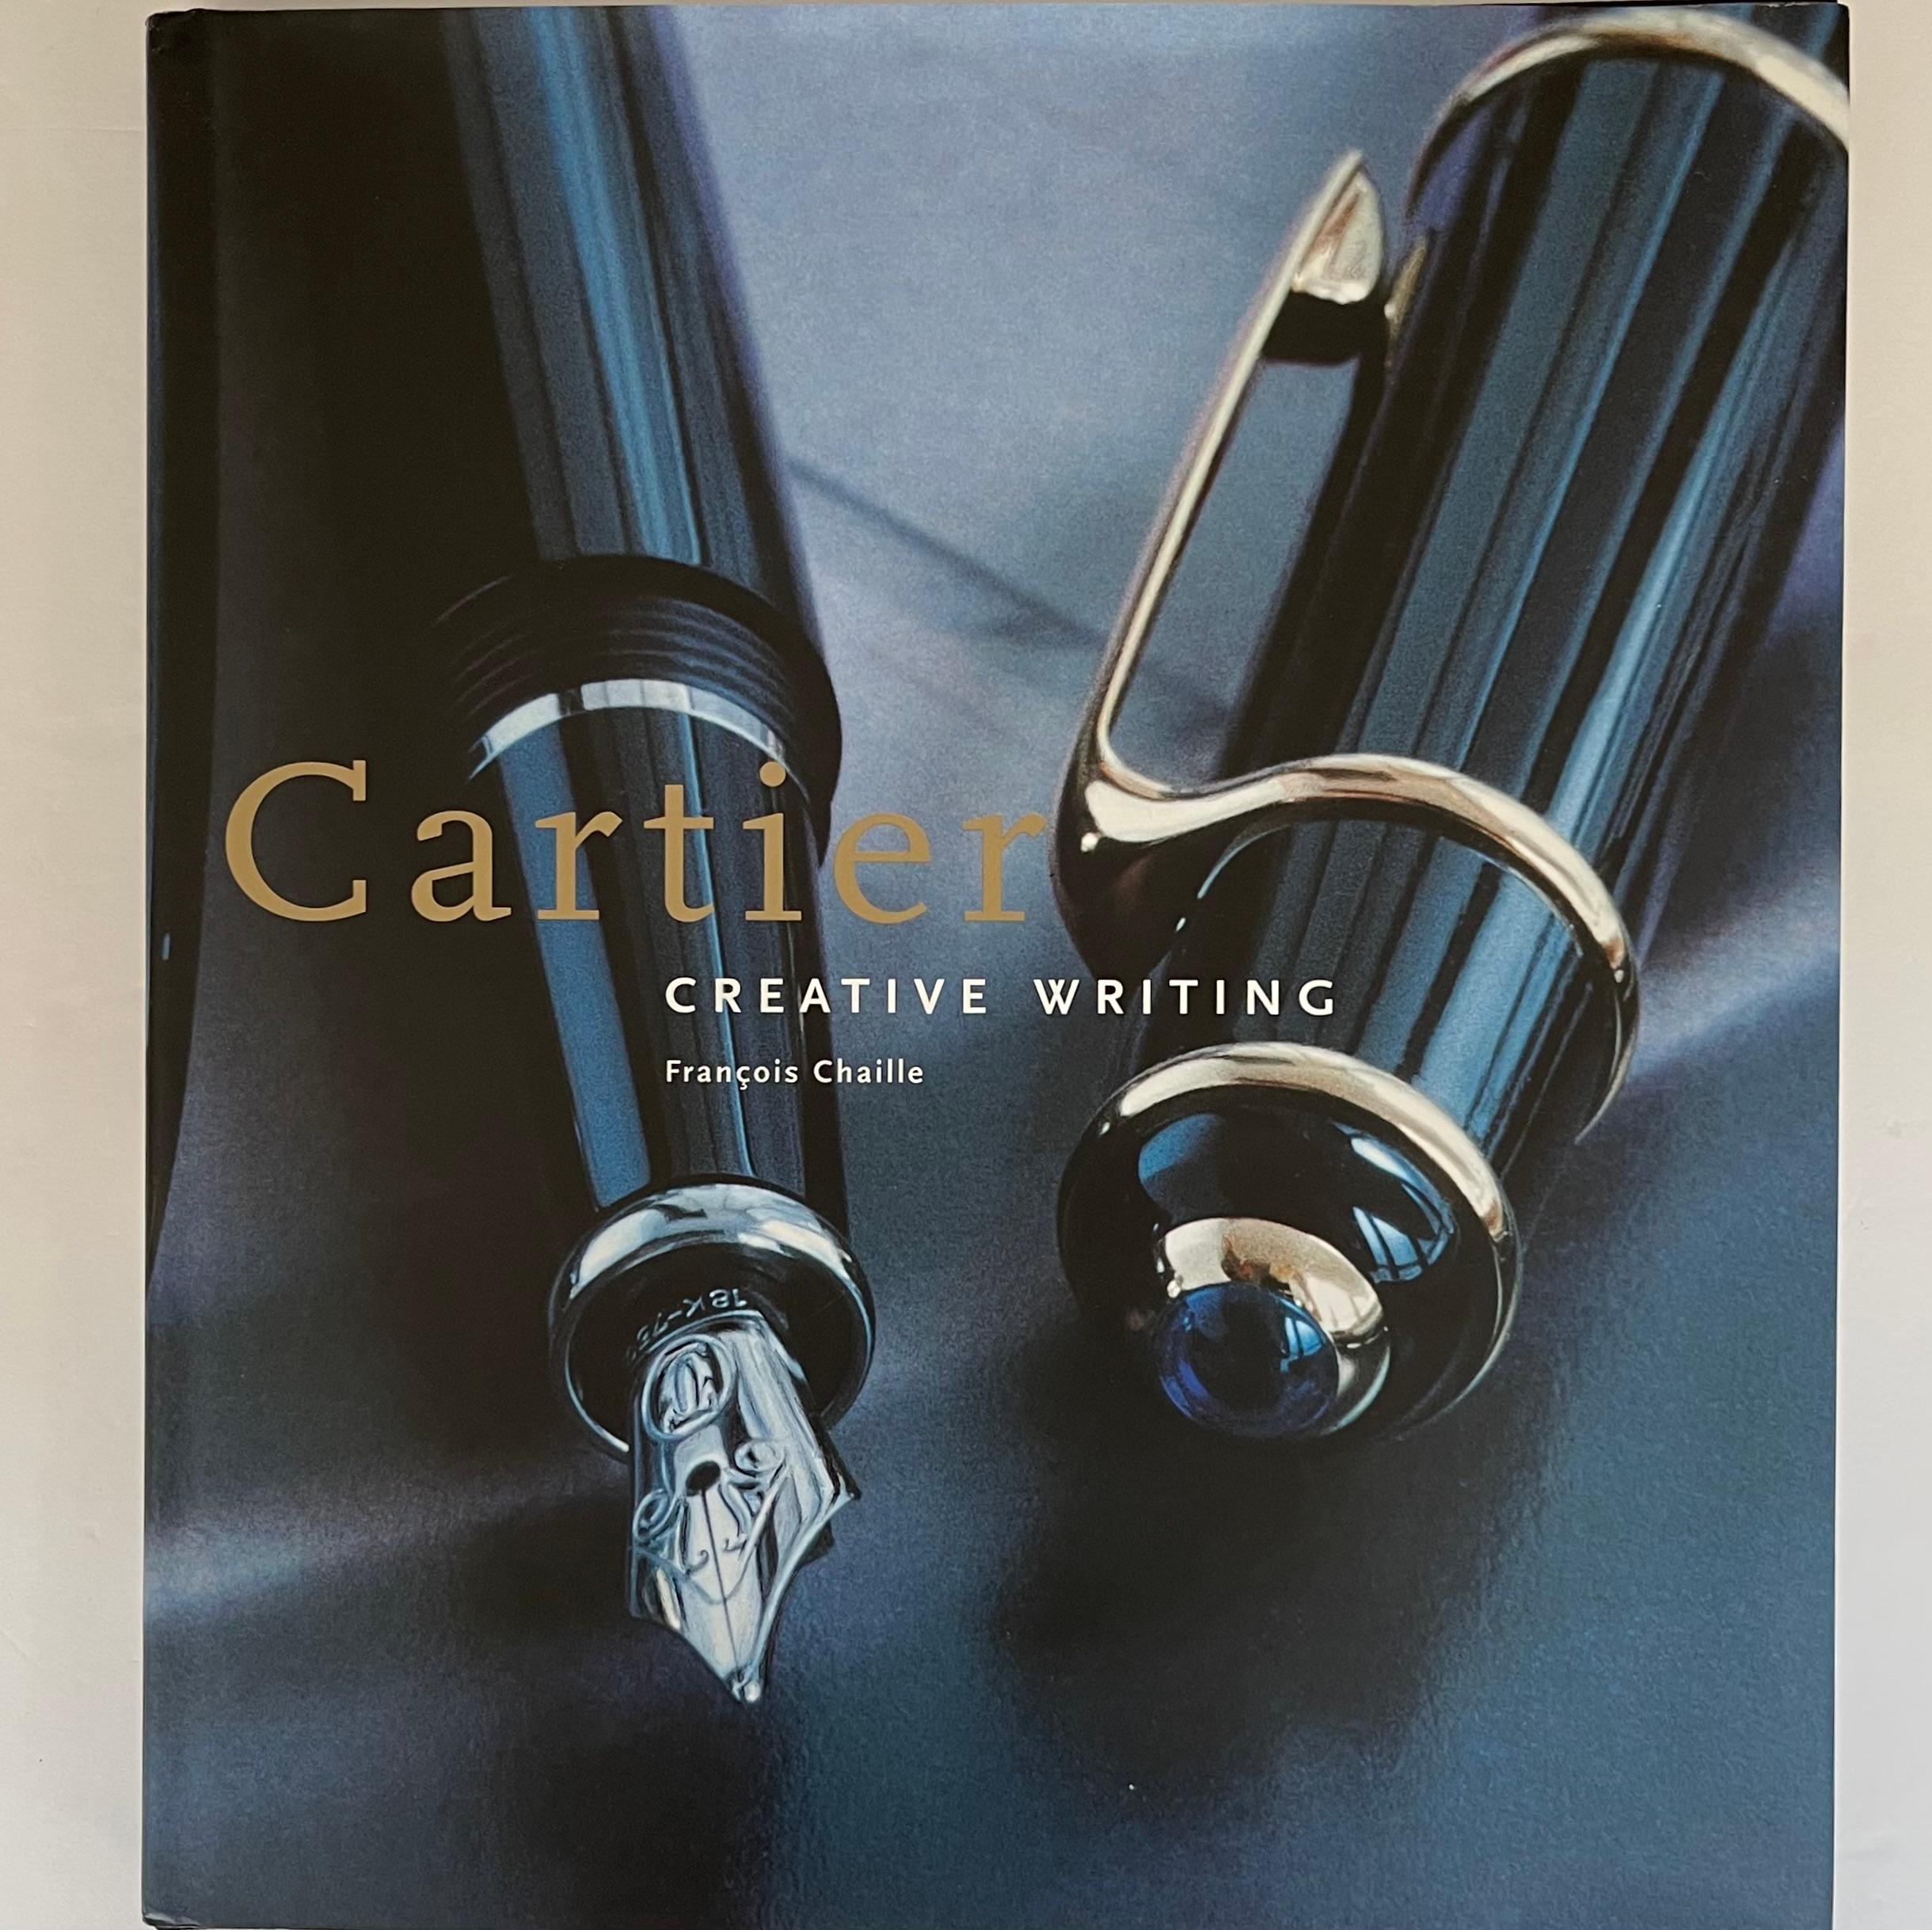 Published by Flammarion 2000

From the creation of its first writing implements in 1868 to today's position as the world's second largest producer of fine writing instruments, Cartier has beautifully combined technical innovation with creative